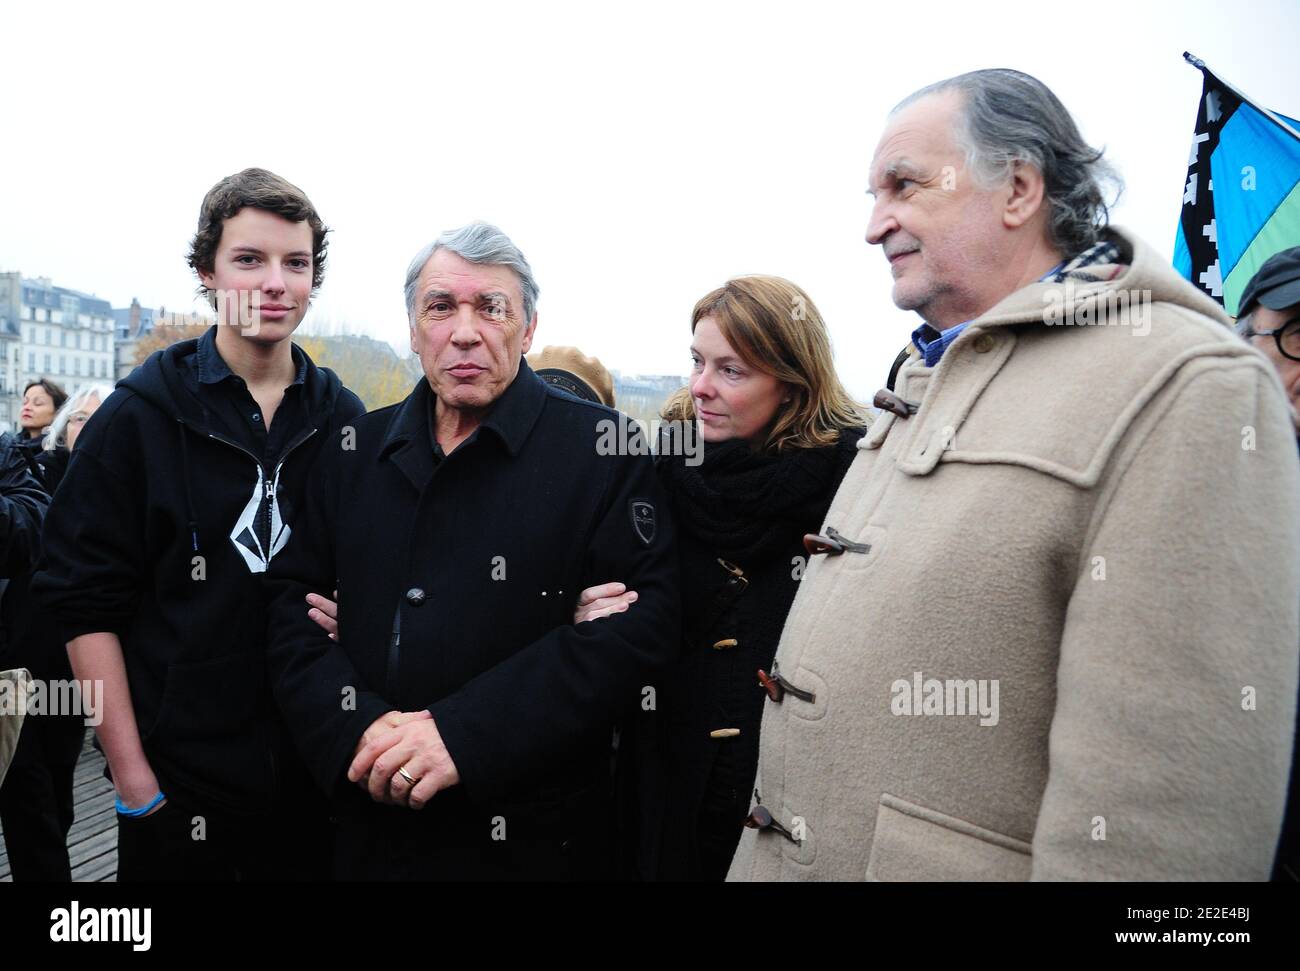 Jean-Christophe Mitterrand, brother Gilbert Mitterrand and family joined politicians and wellwishers to pay a last tribute to Danielle Mitterrand on the Pont des Arts bridge in Paris, France on November 24, 2011. France's former first lady died aged 87 on November 22. Photo by Mousse/ABACAPRESS.COM Stock Photo